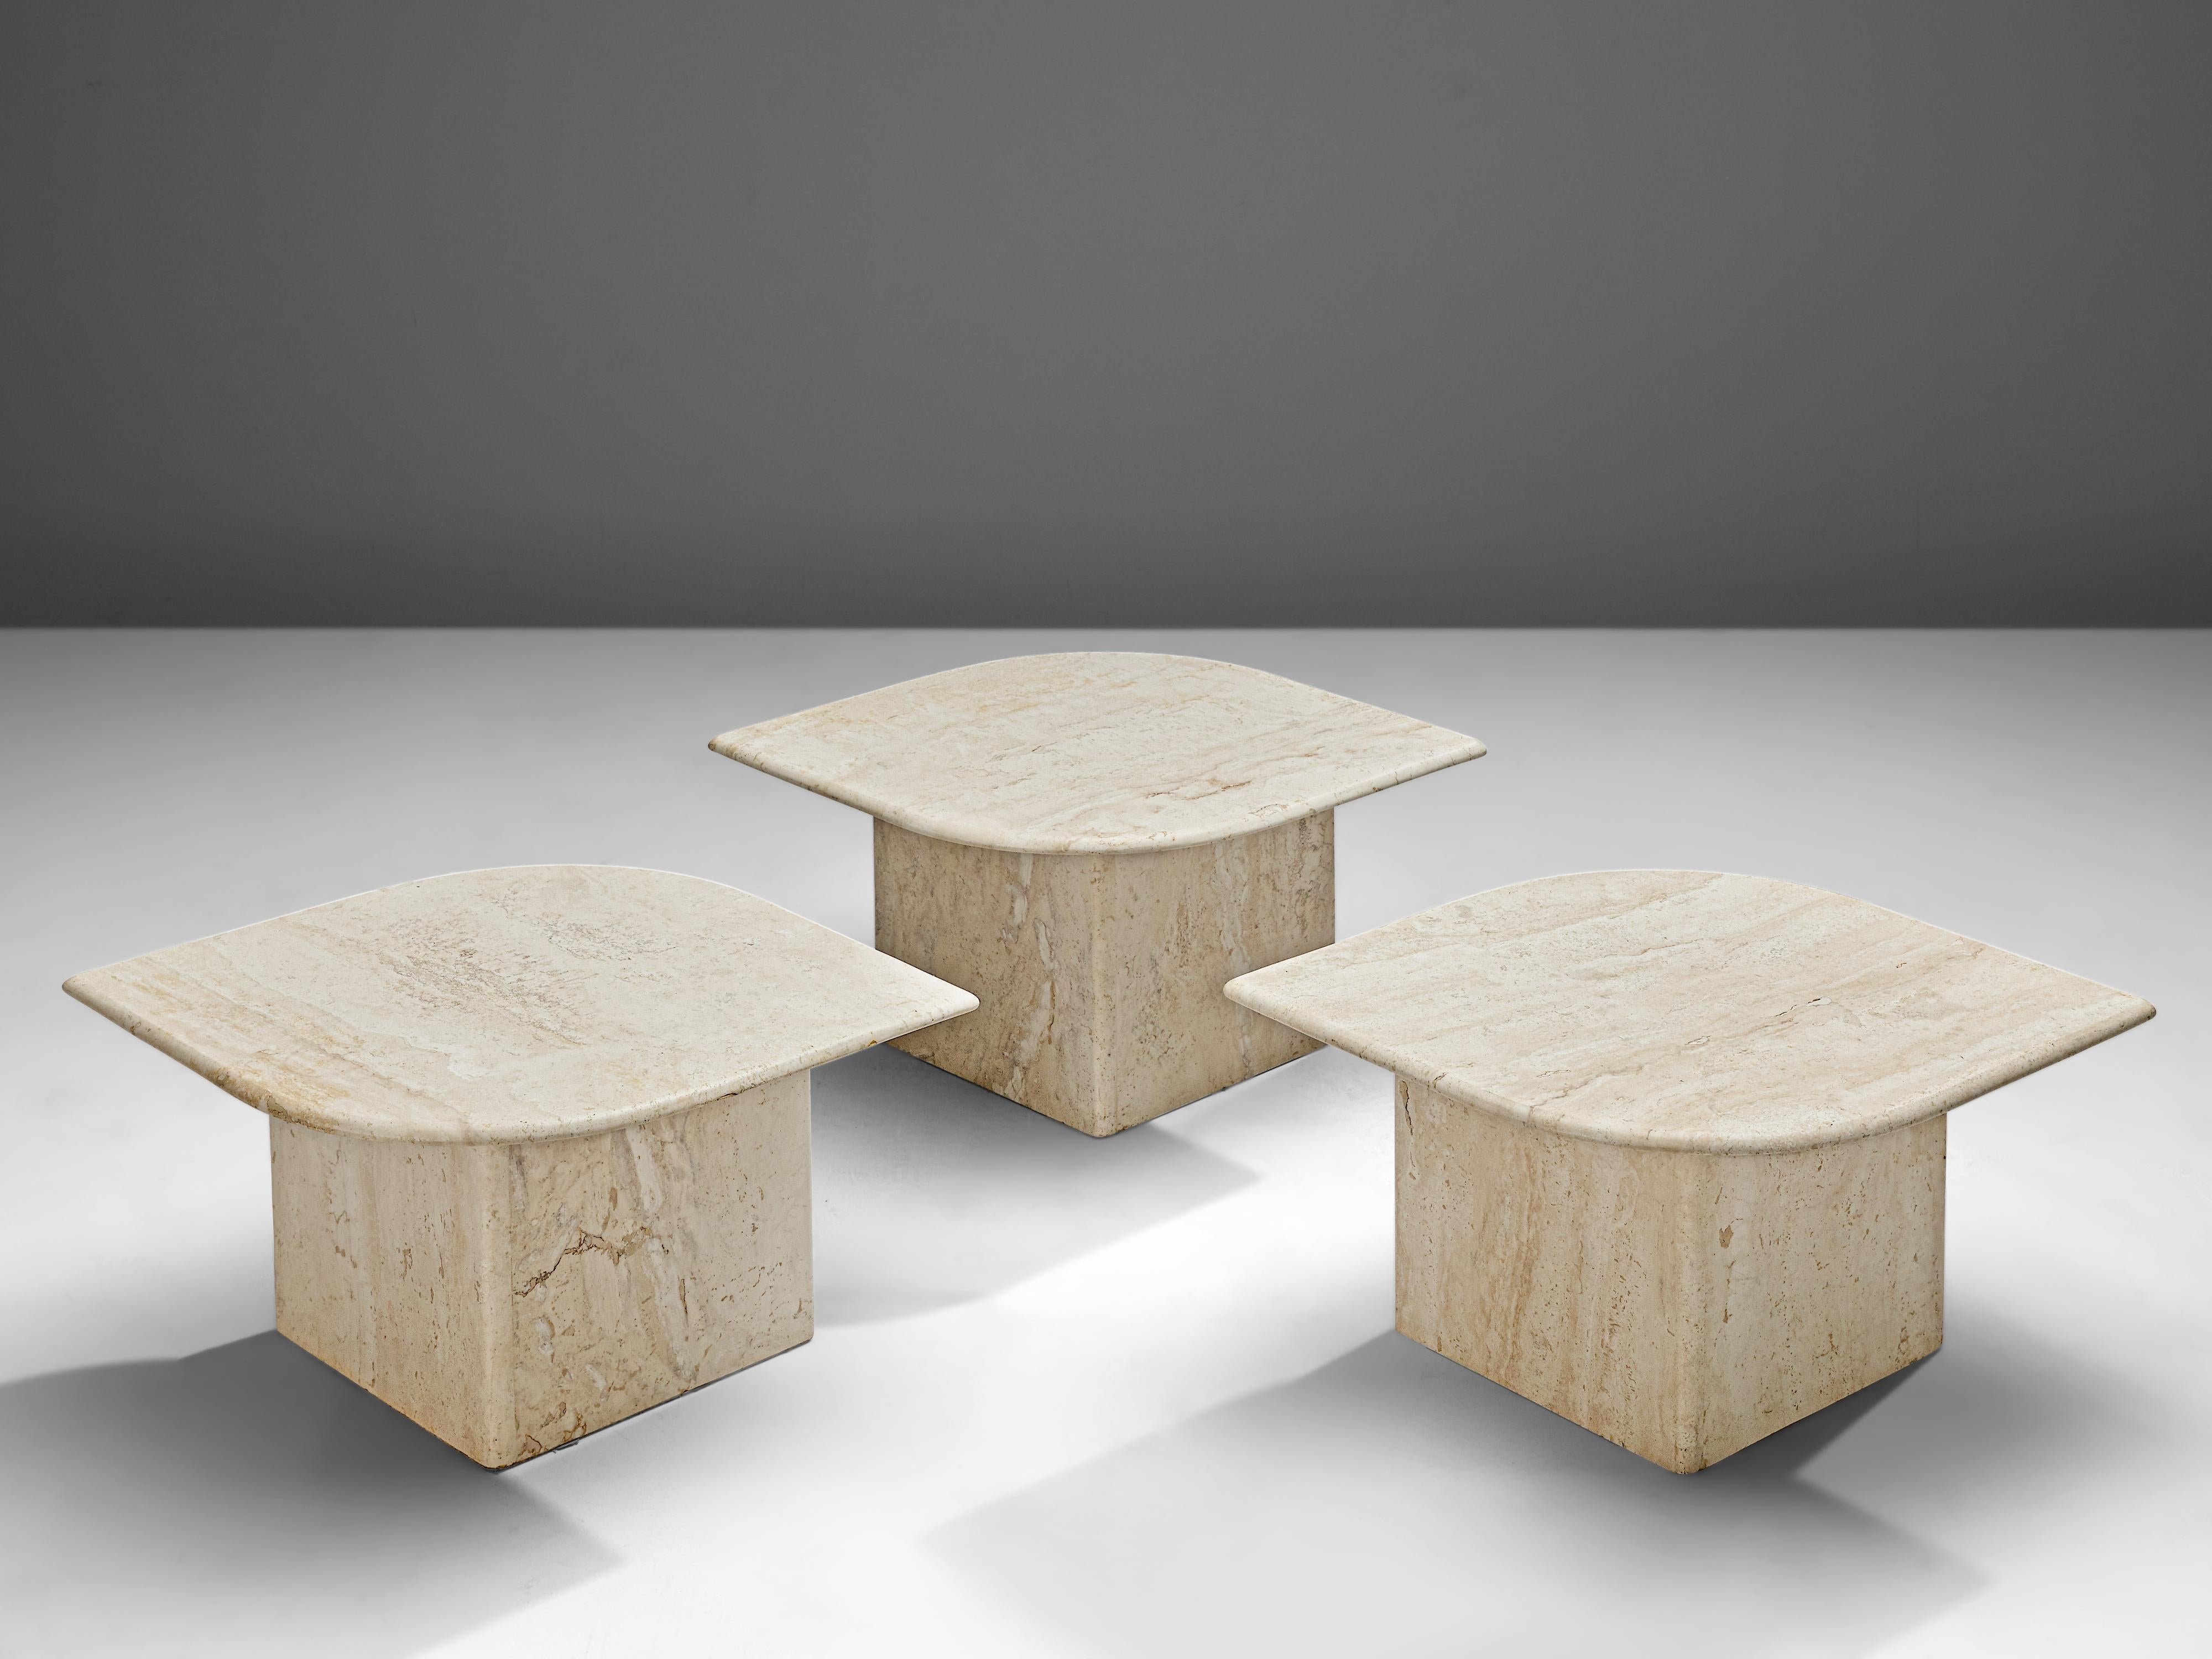 Set of three coffee tables, travertine, Italy, 1970s

These coffee tables feature an eye-shaped travertine tabletop on a L-shaped base. Depending on the way how you place the tables the base either gives the impression to be a block or the true